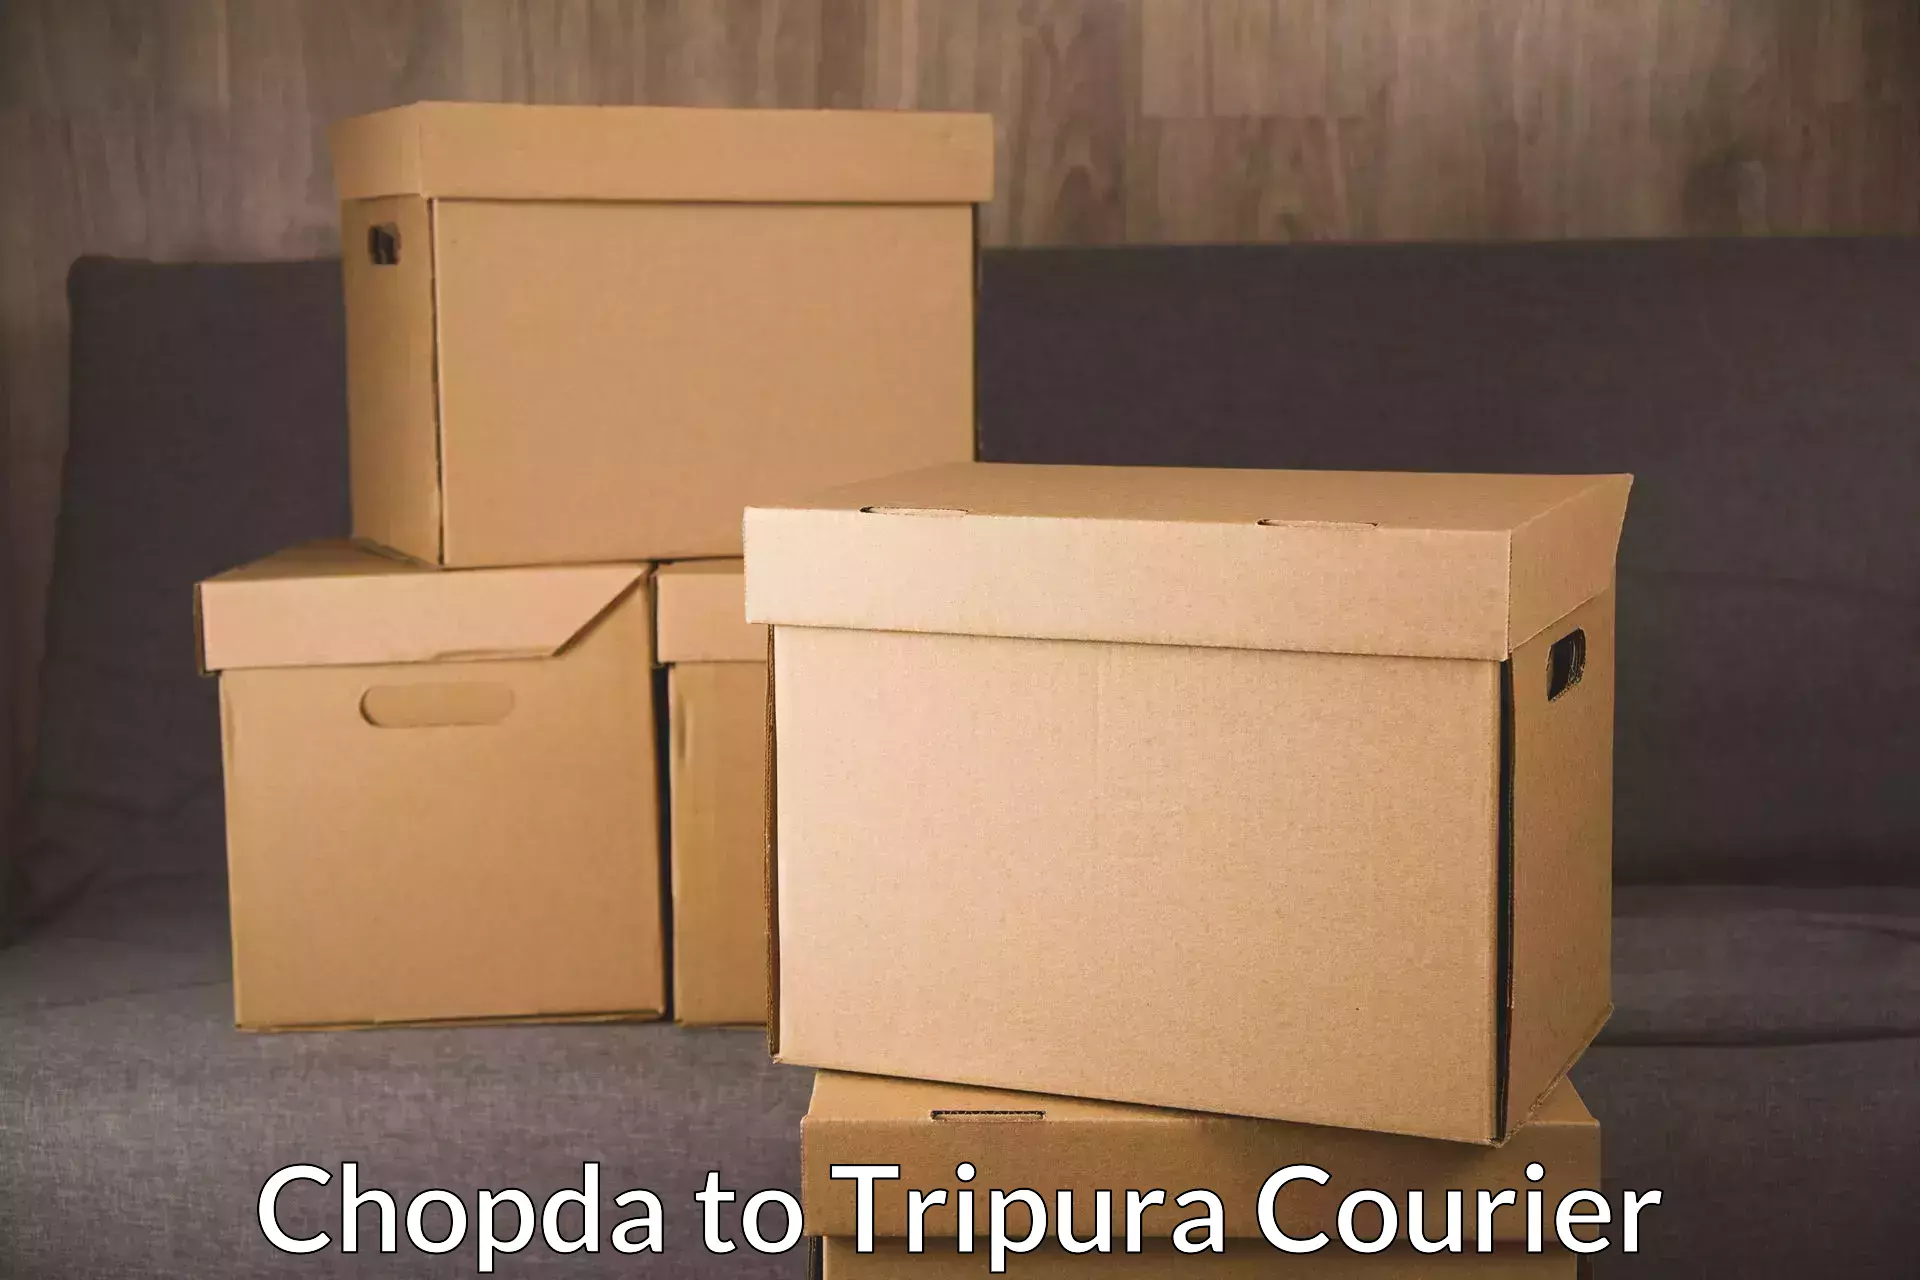 Reliable delivery network Chopda to Udaipur Tripura